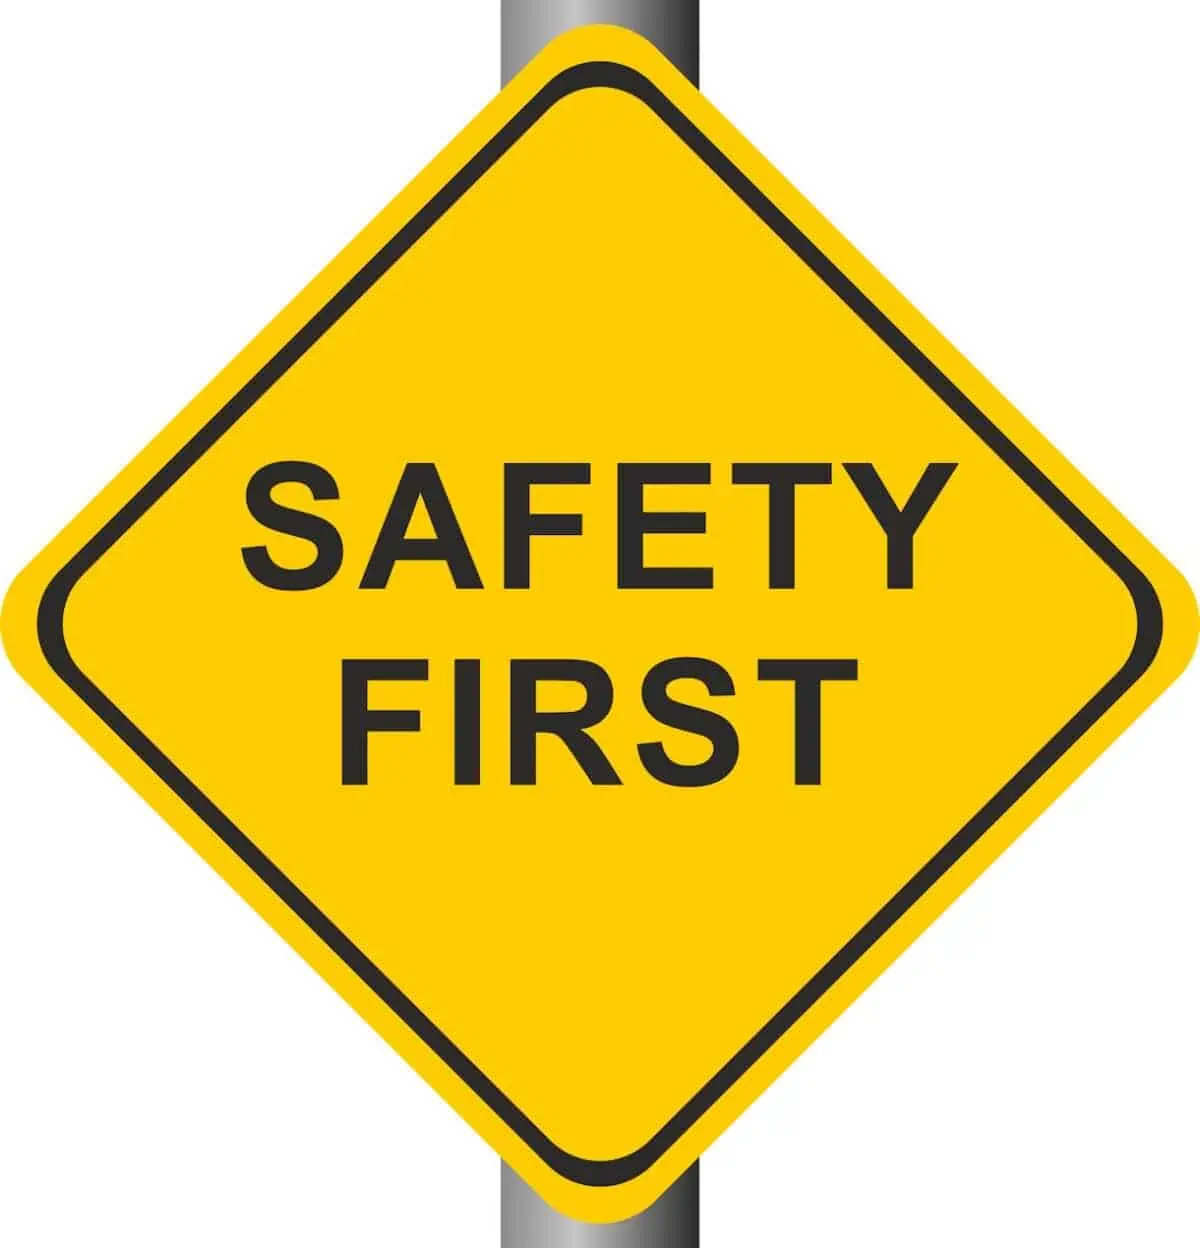 What Are Your Health and Safety Rights at Work?